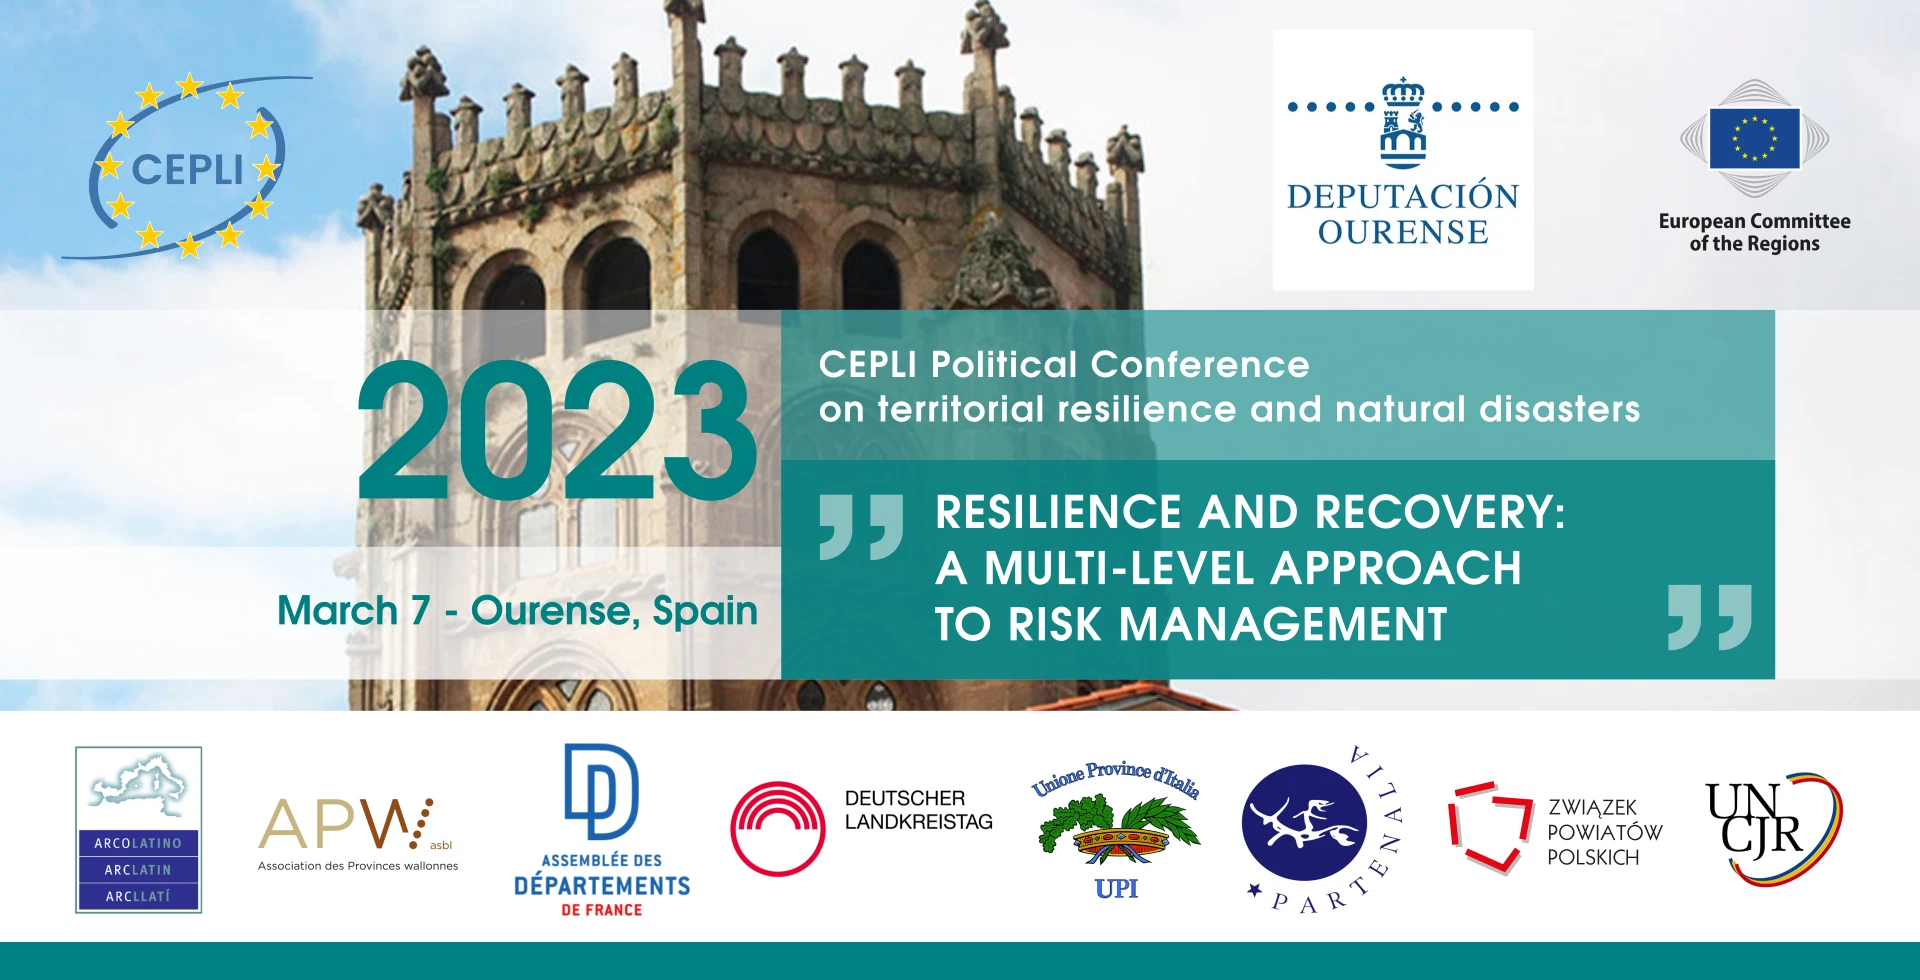 CEPLI Political Conference on territorial resilience and natural disasters